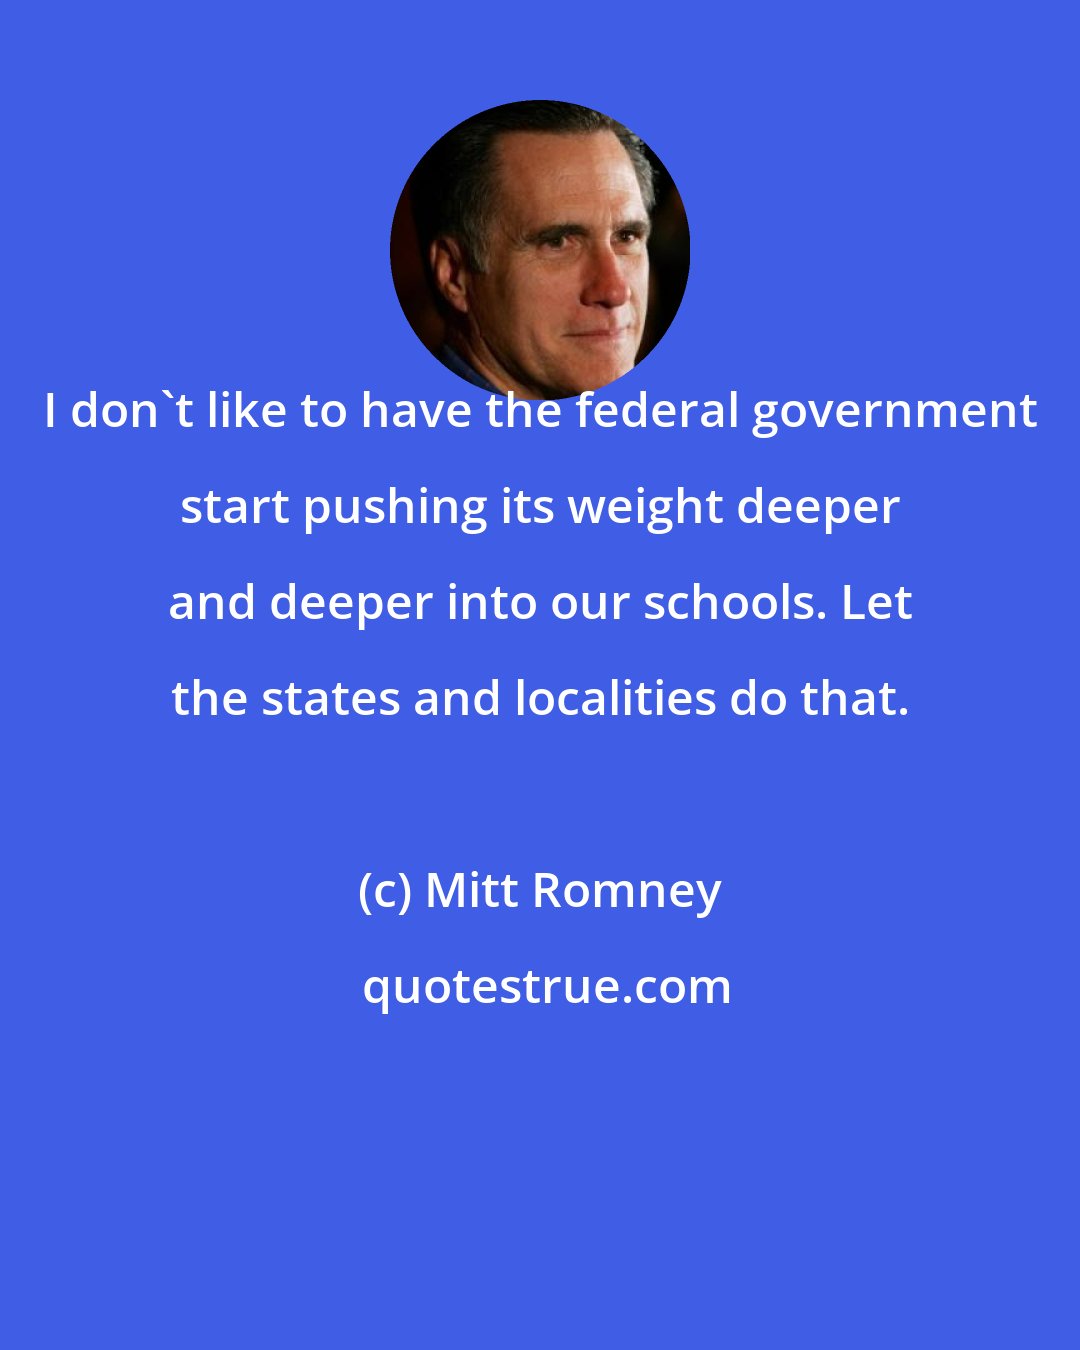 Mitt Romney: I don't like to have the federal government start pushing its weight deeper and deeper into our schools. Let the states and localities do that.